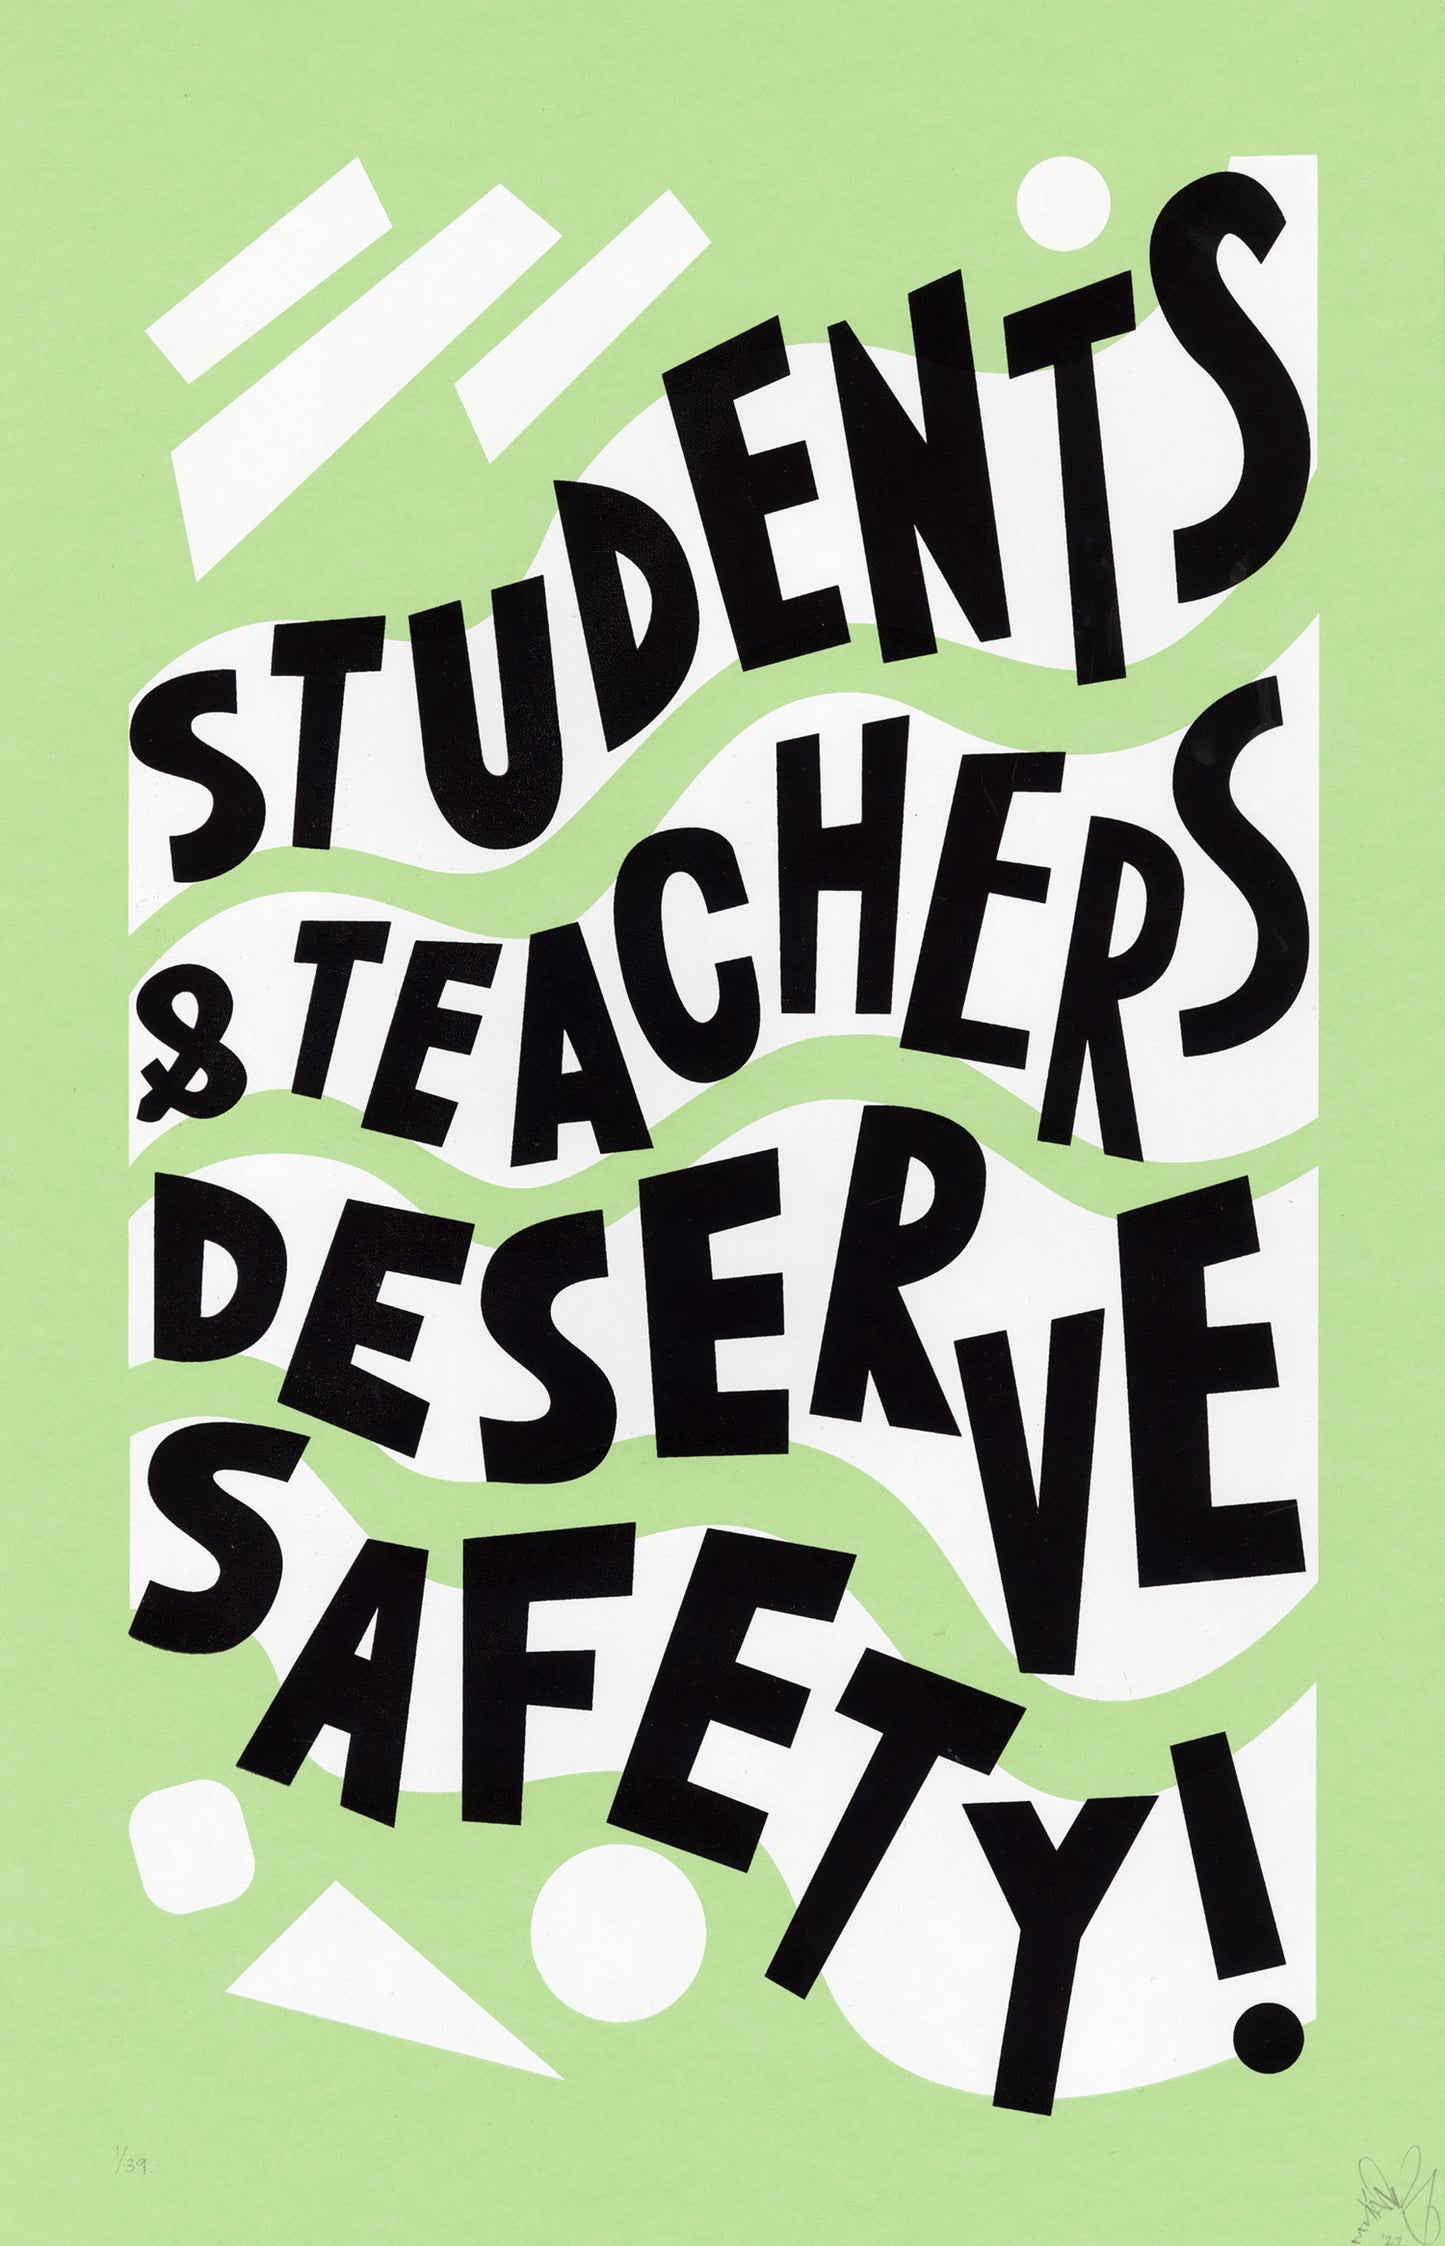 Students and Teachers Deserve Safety